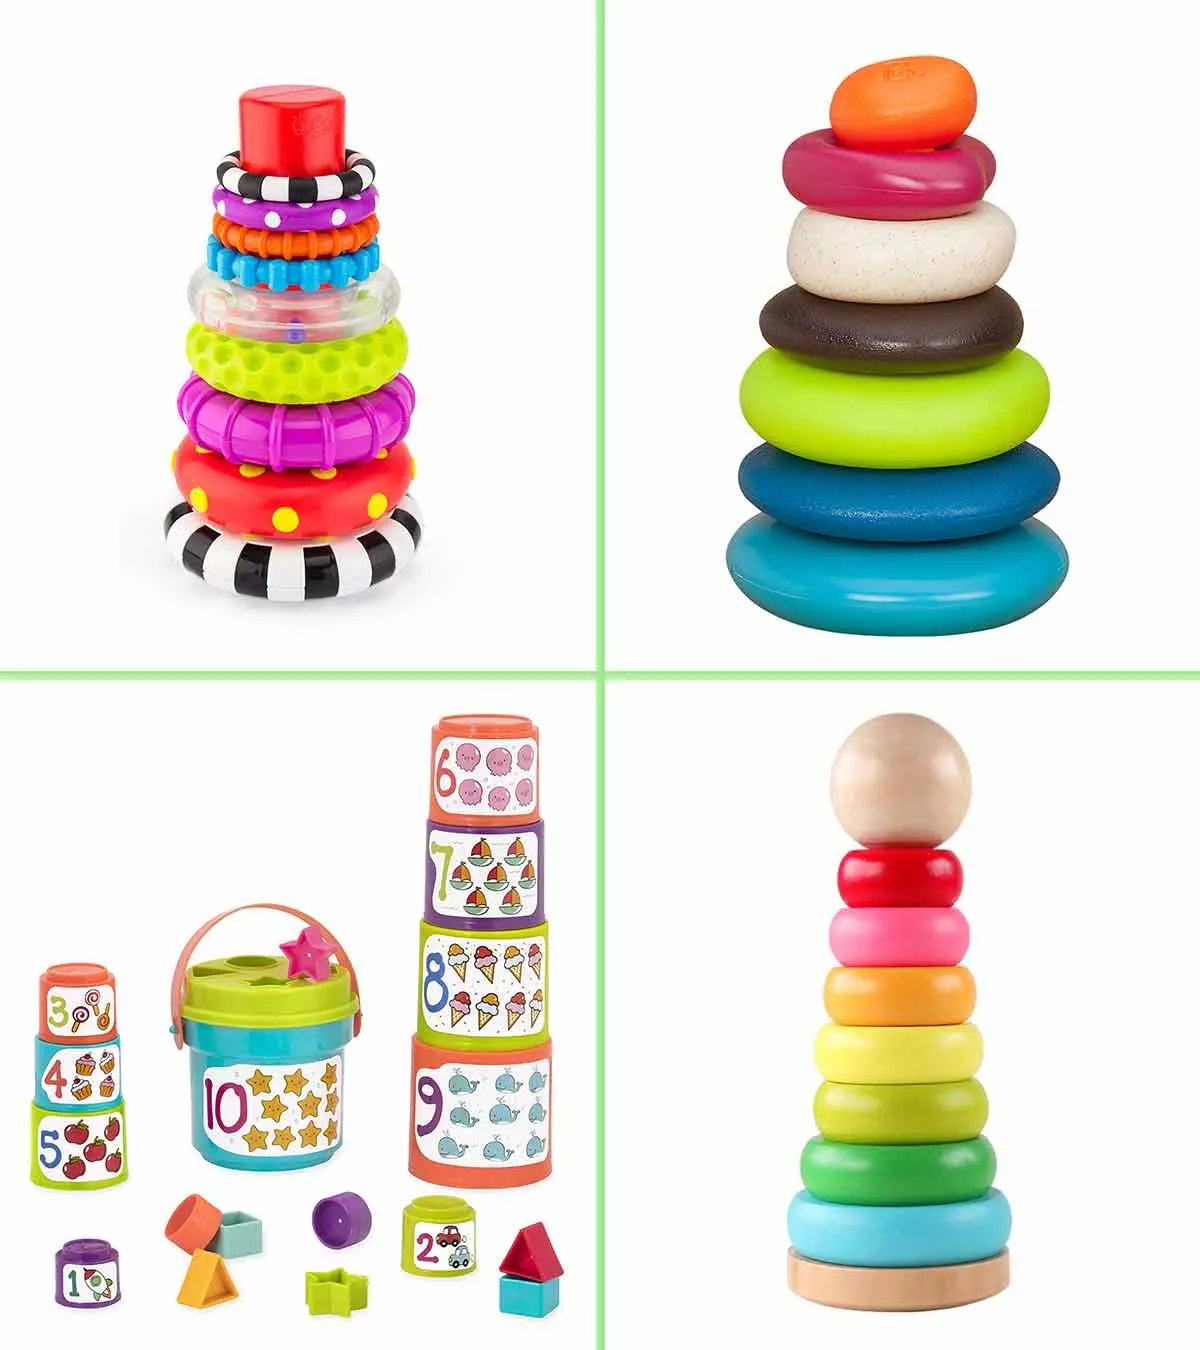 Your child will love stacking these toys, from colorful rings to wooden blocks and cups.